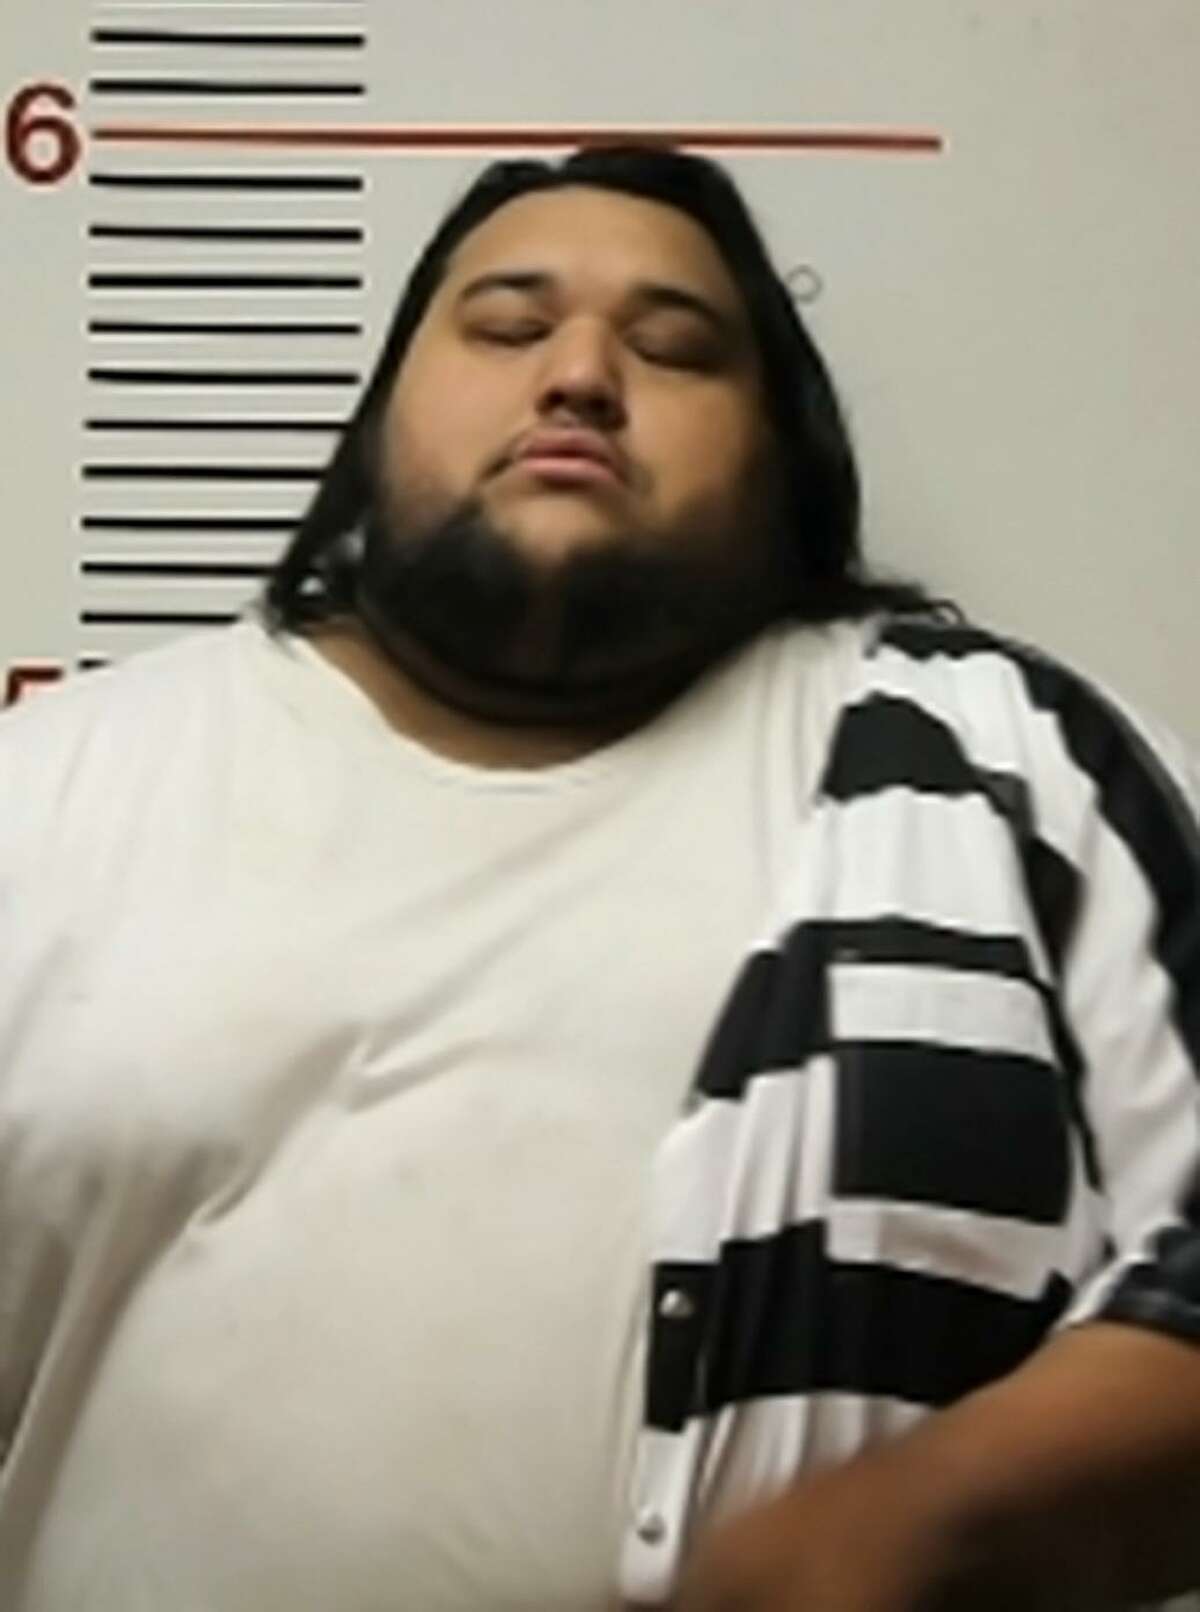 Christian Martinez was arrested in Palestine in connection with the deaths of 53 migrants in the back of a semi-truck in San Antonio.